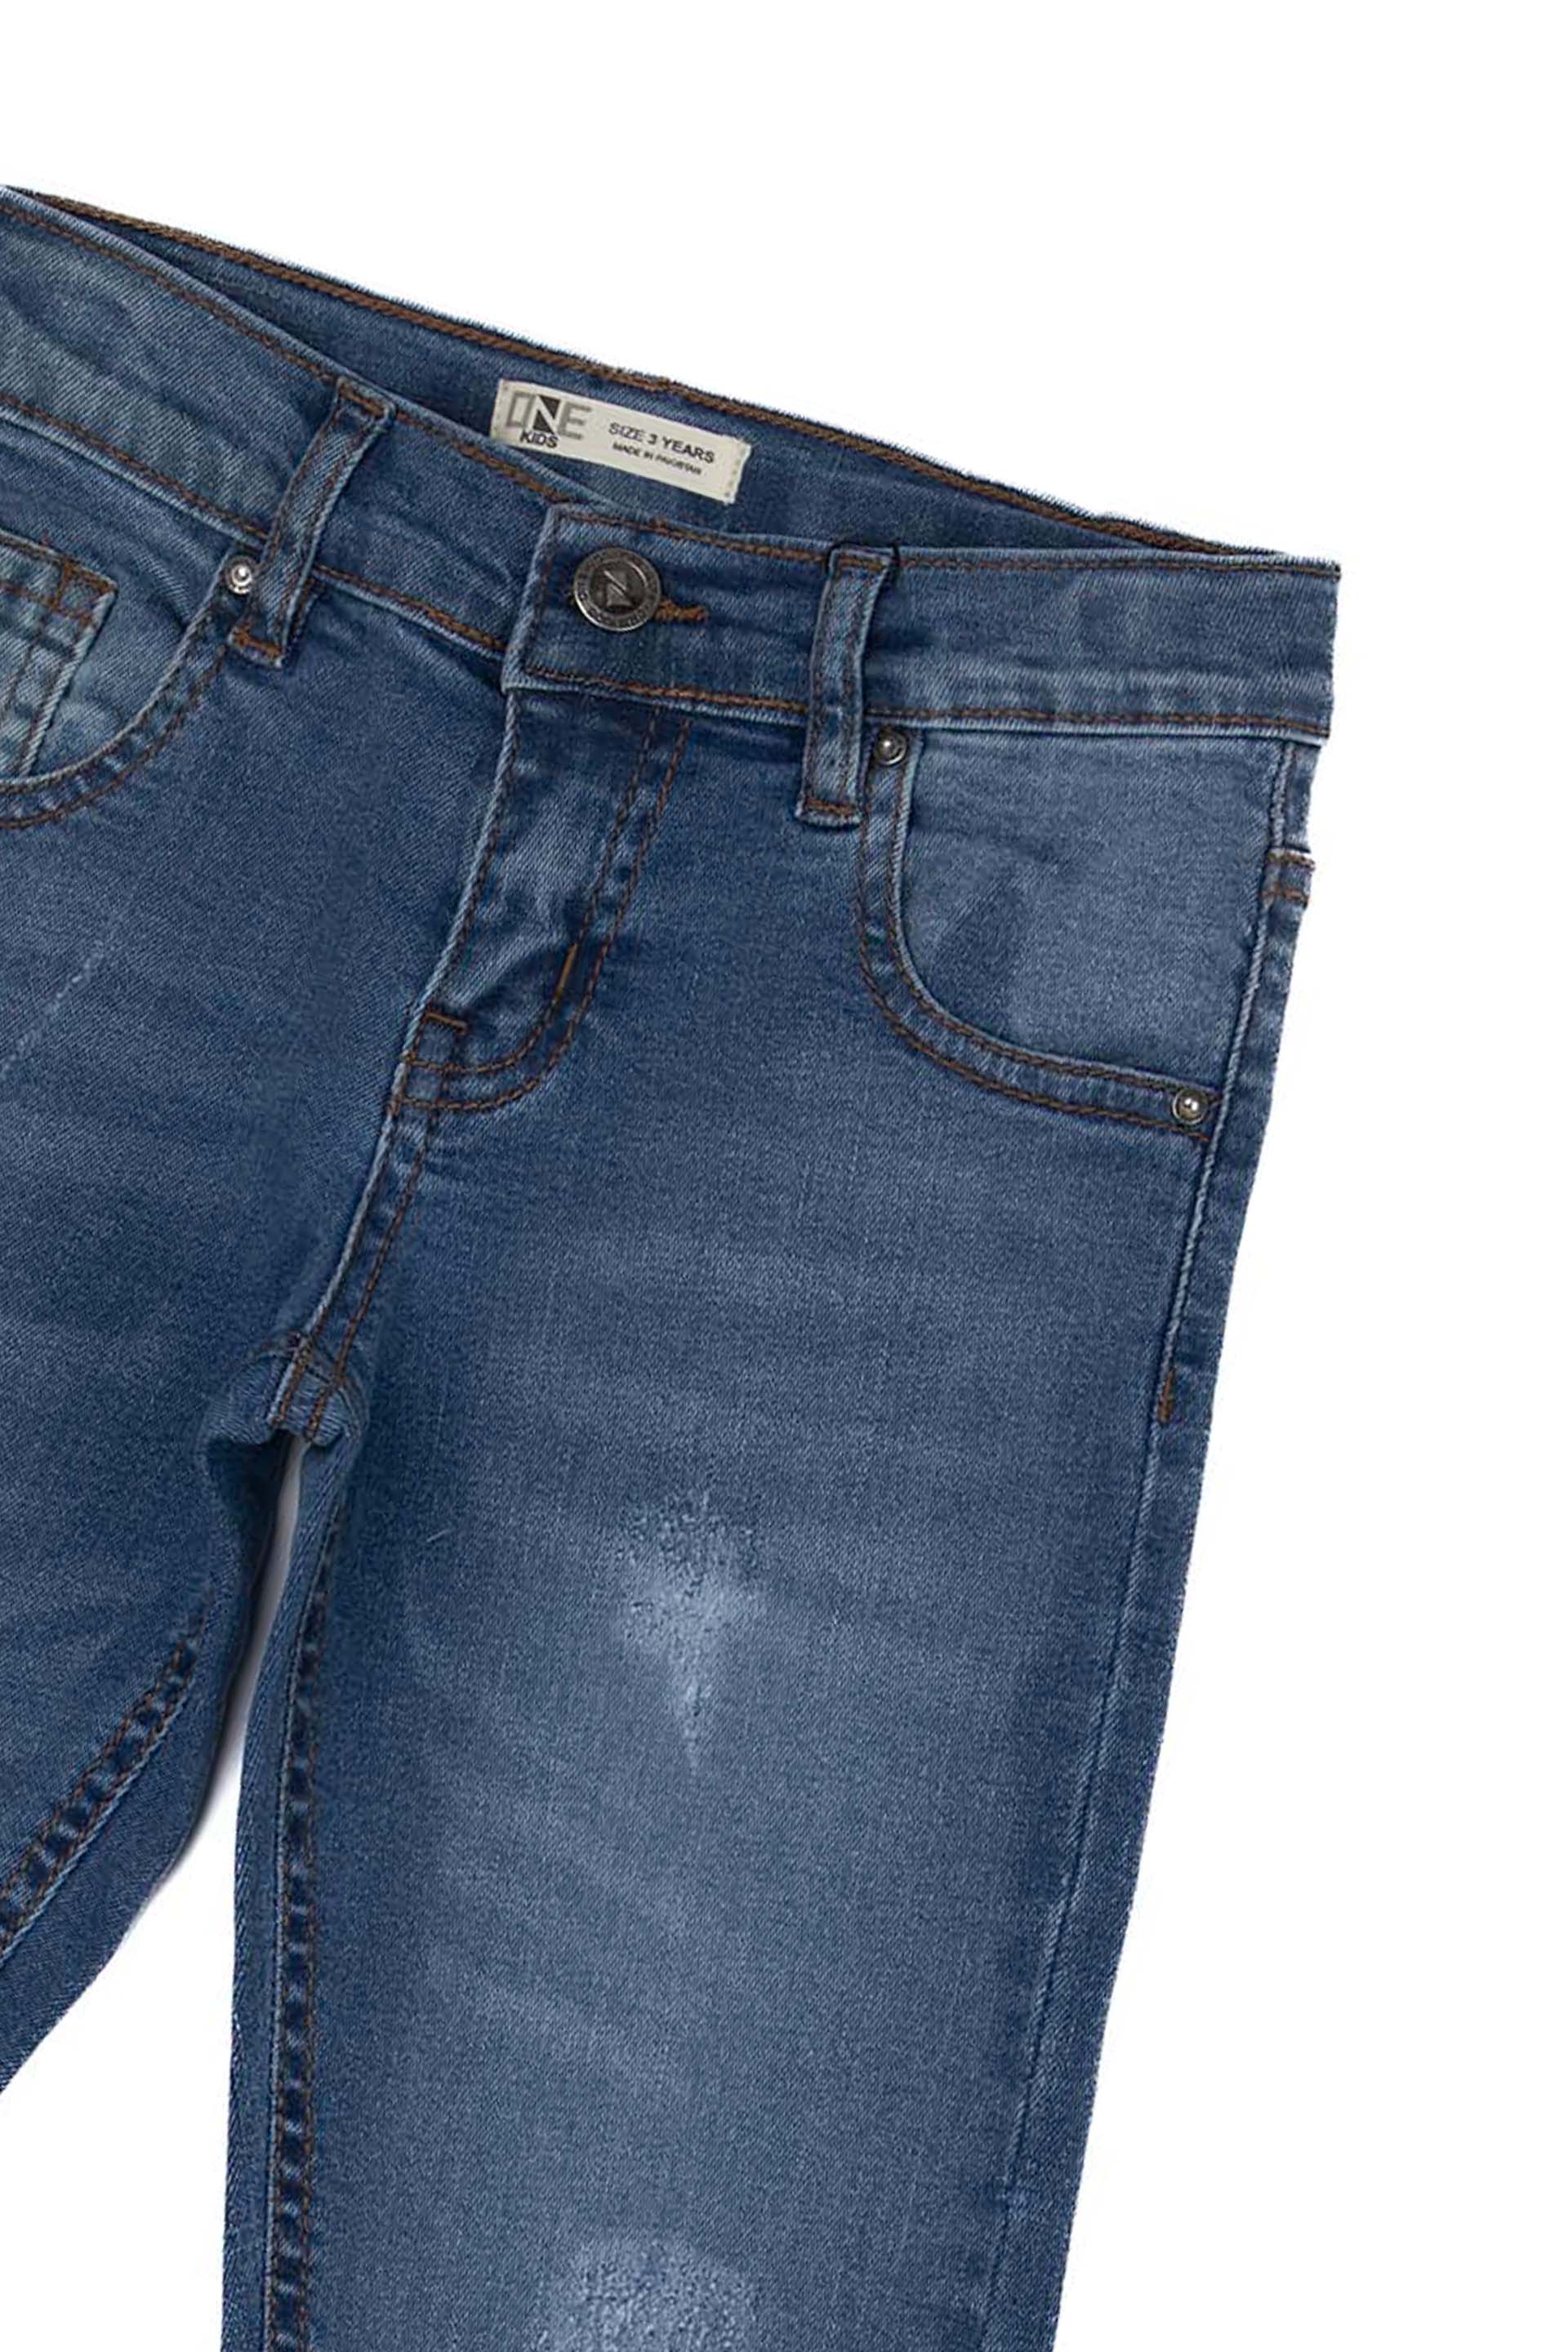 Rugged Jeans Blue